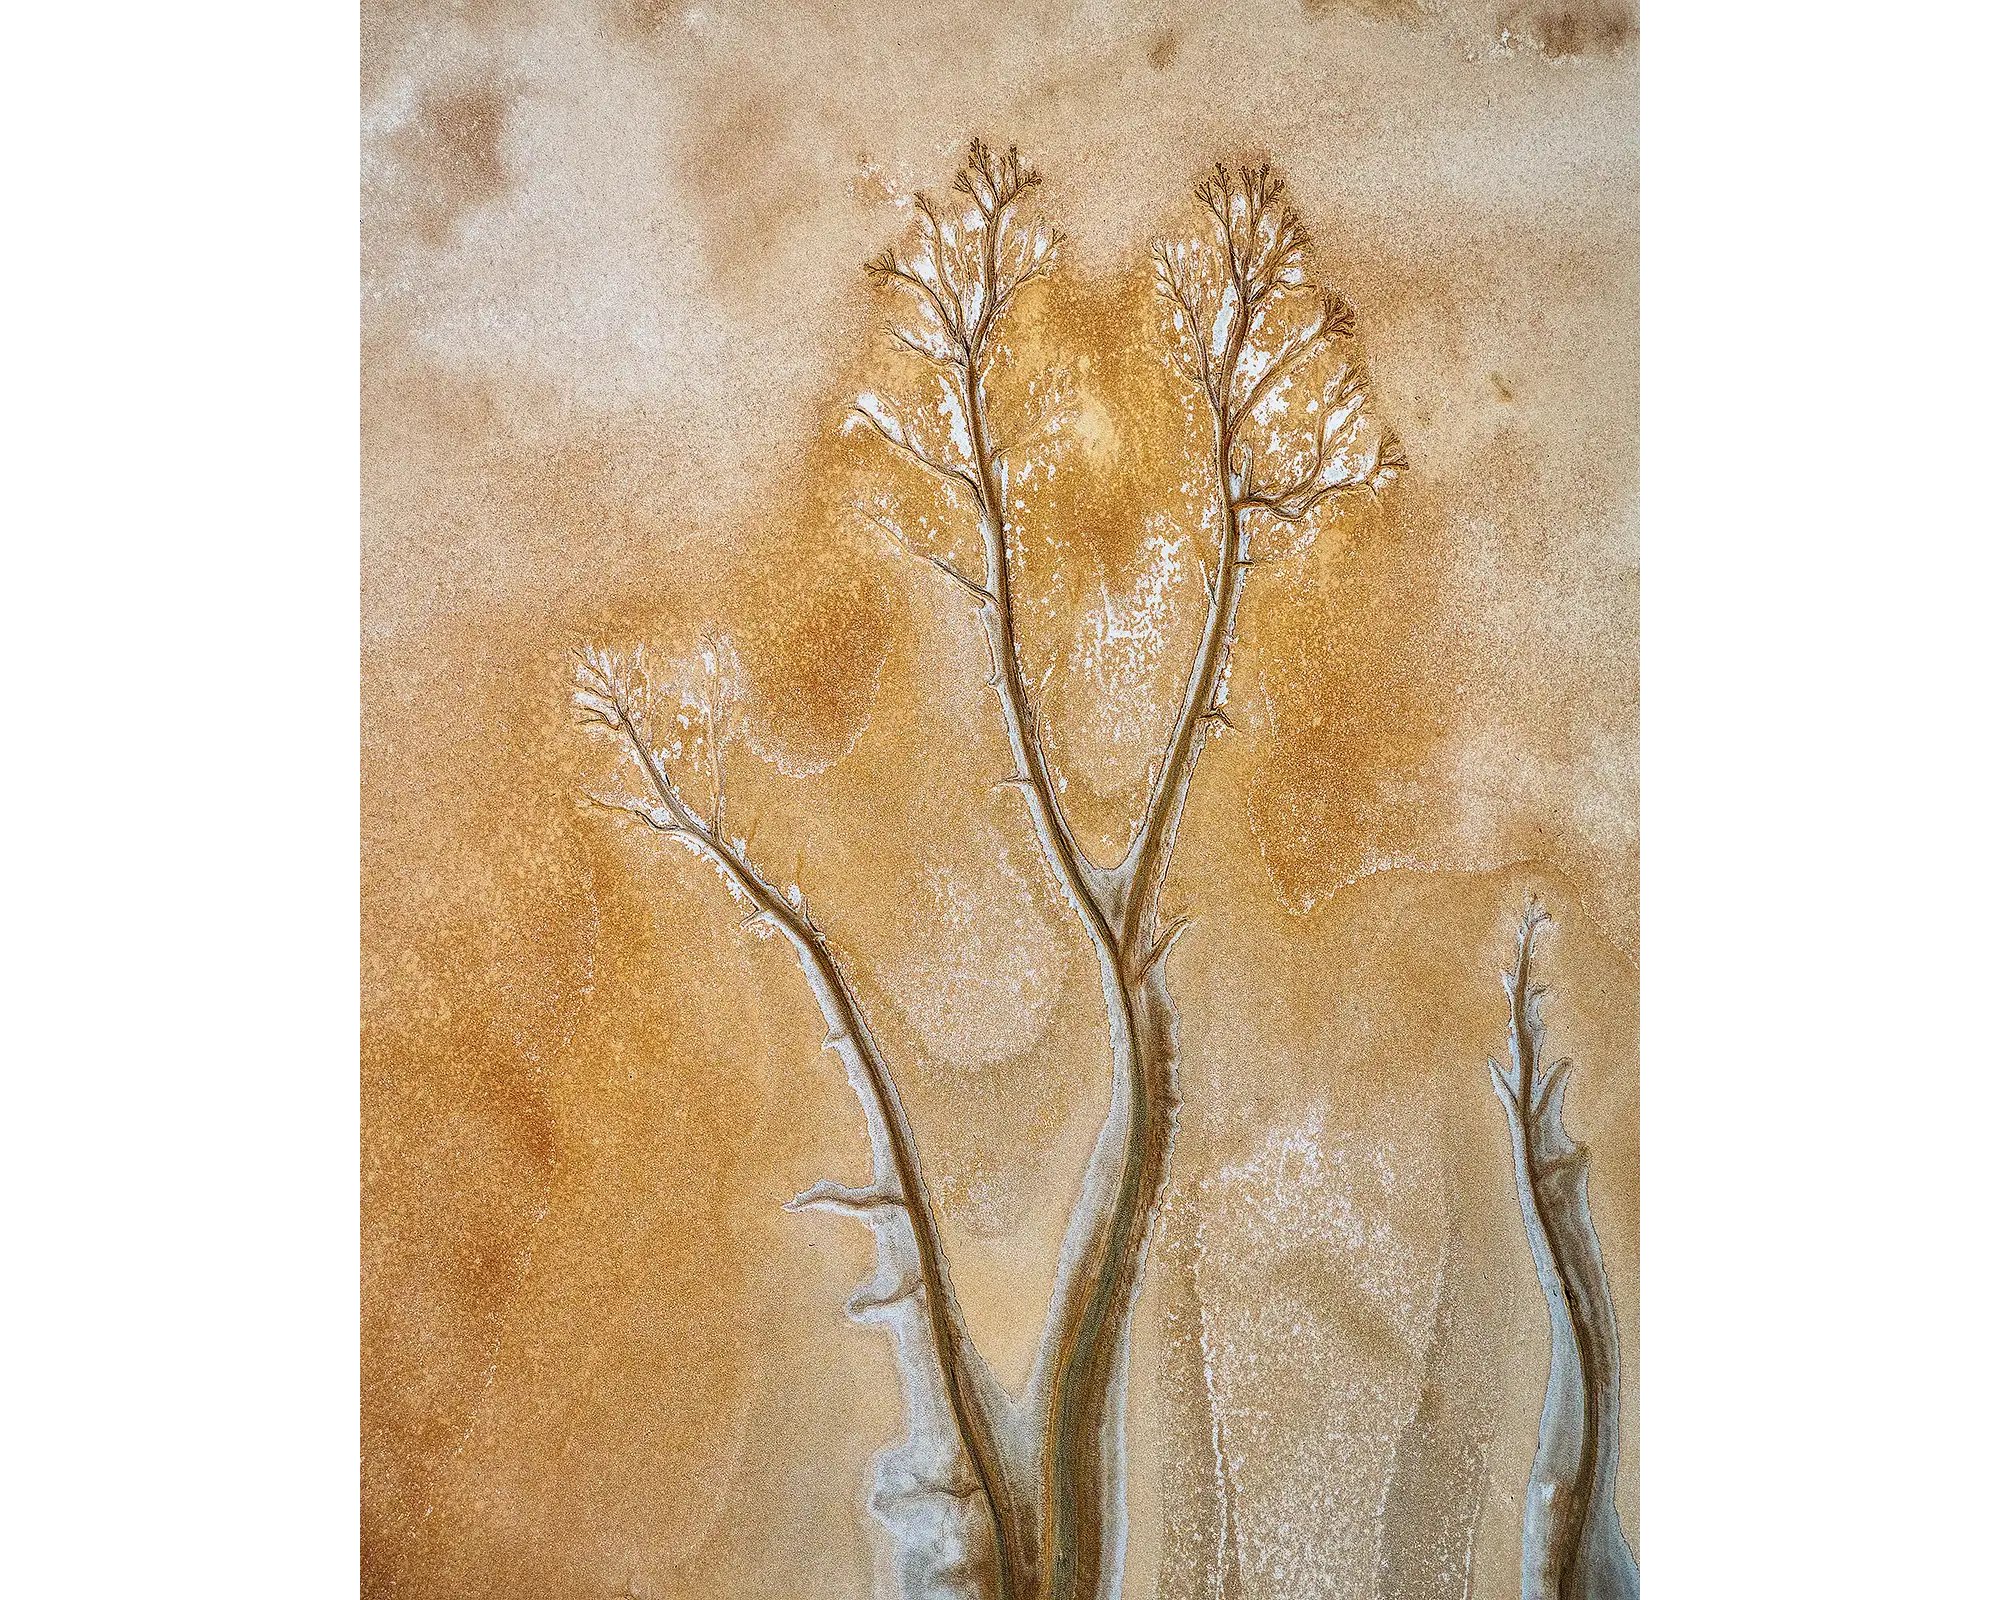 Patterns in mud flats, King River, The Kimberley, Western Australia.